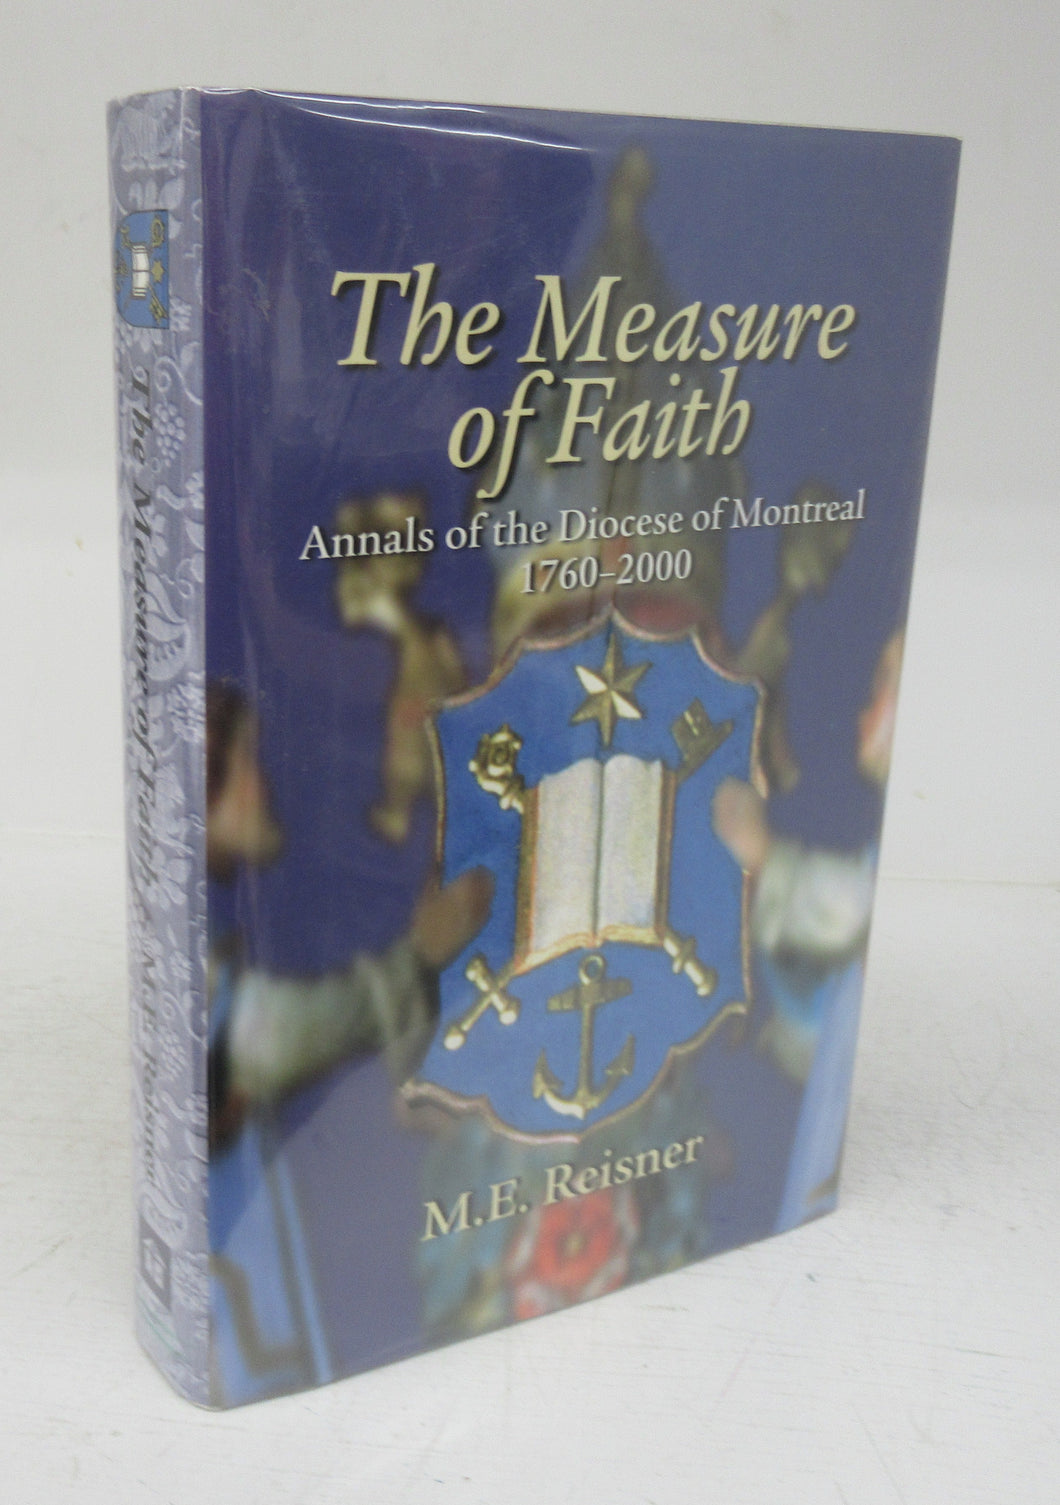 The Measure of Faith: Annals of the Diocese of Montreal 1760-2000